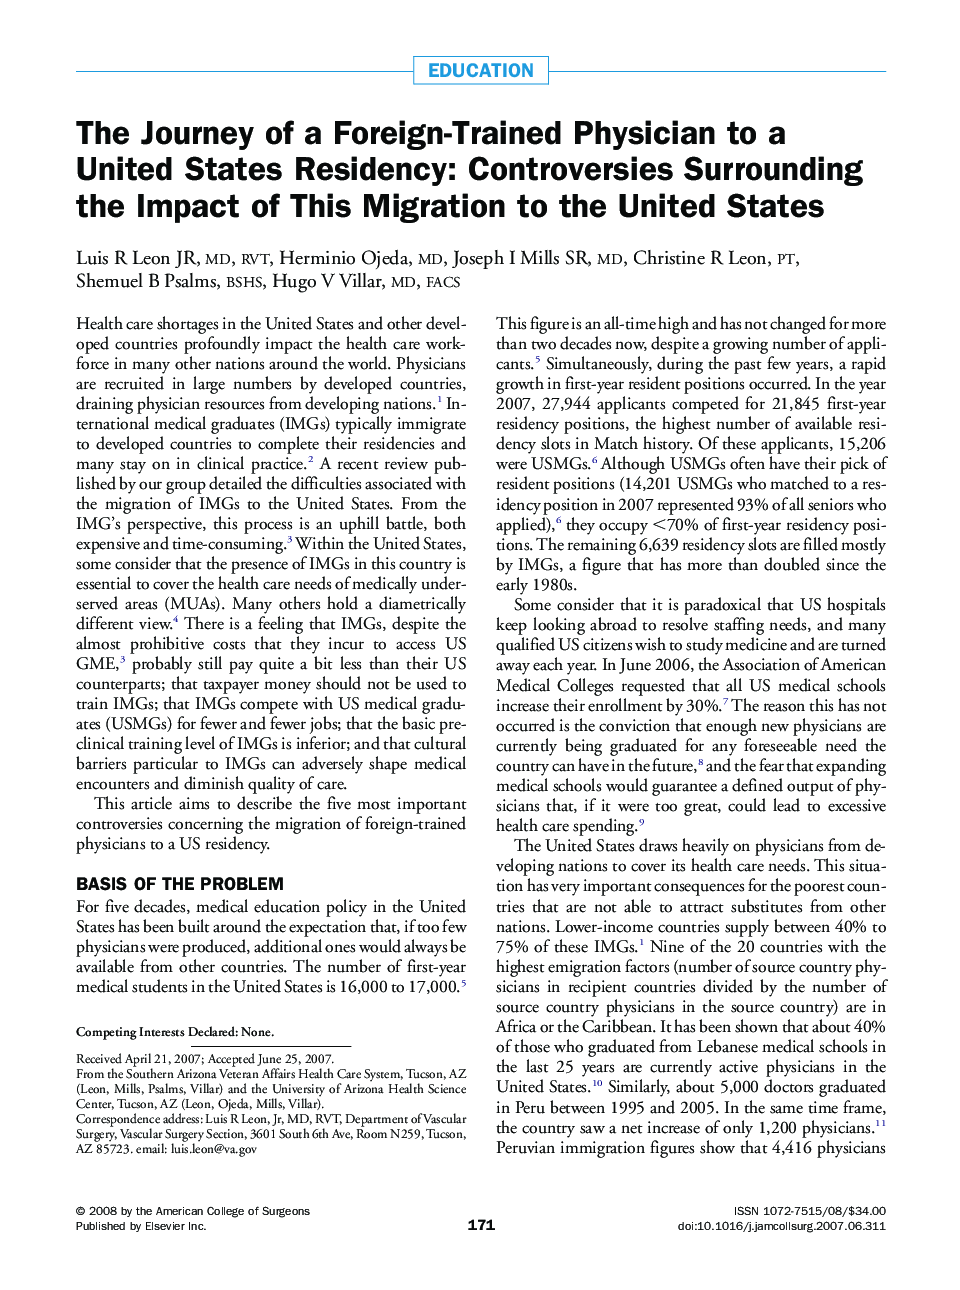 The Journey of a Foreign-Trained Physician to a United States Residency: Controversies Surrounding the Impact of This Migration to the United States